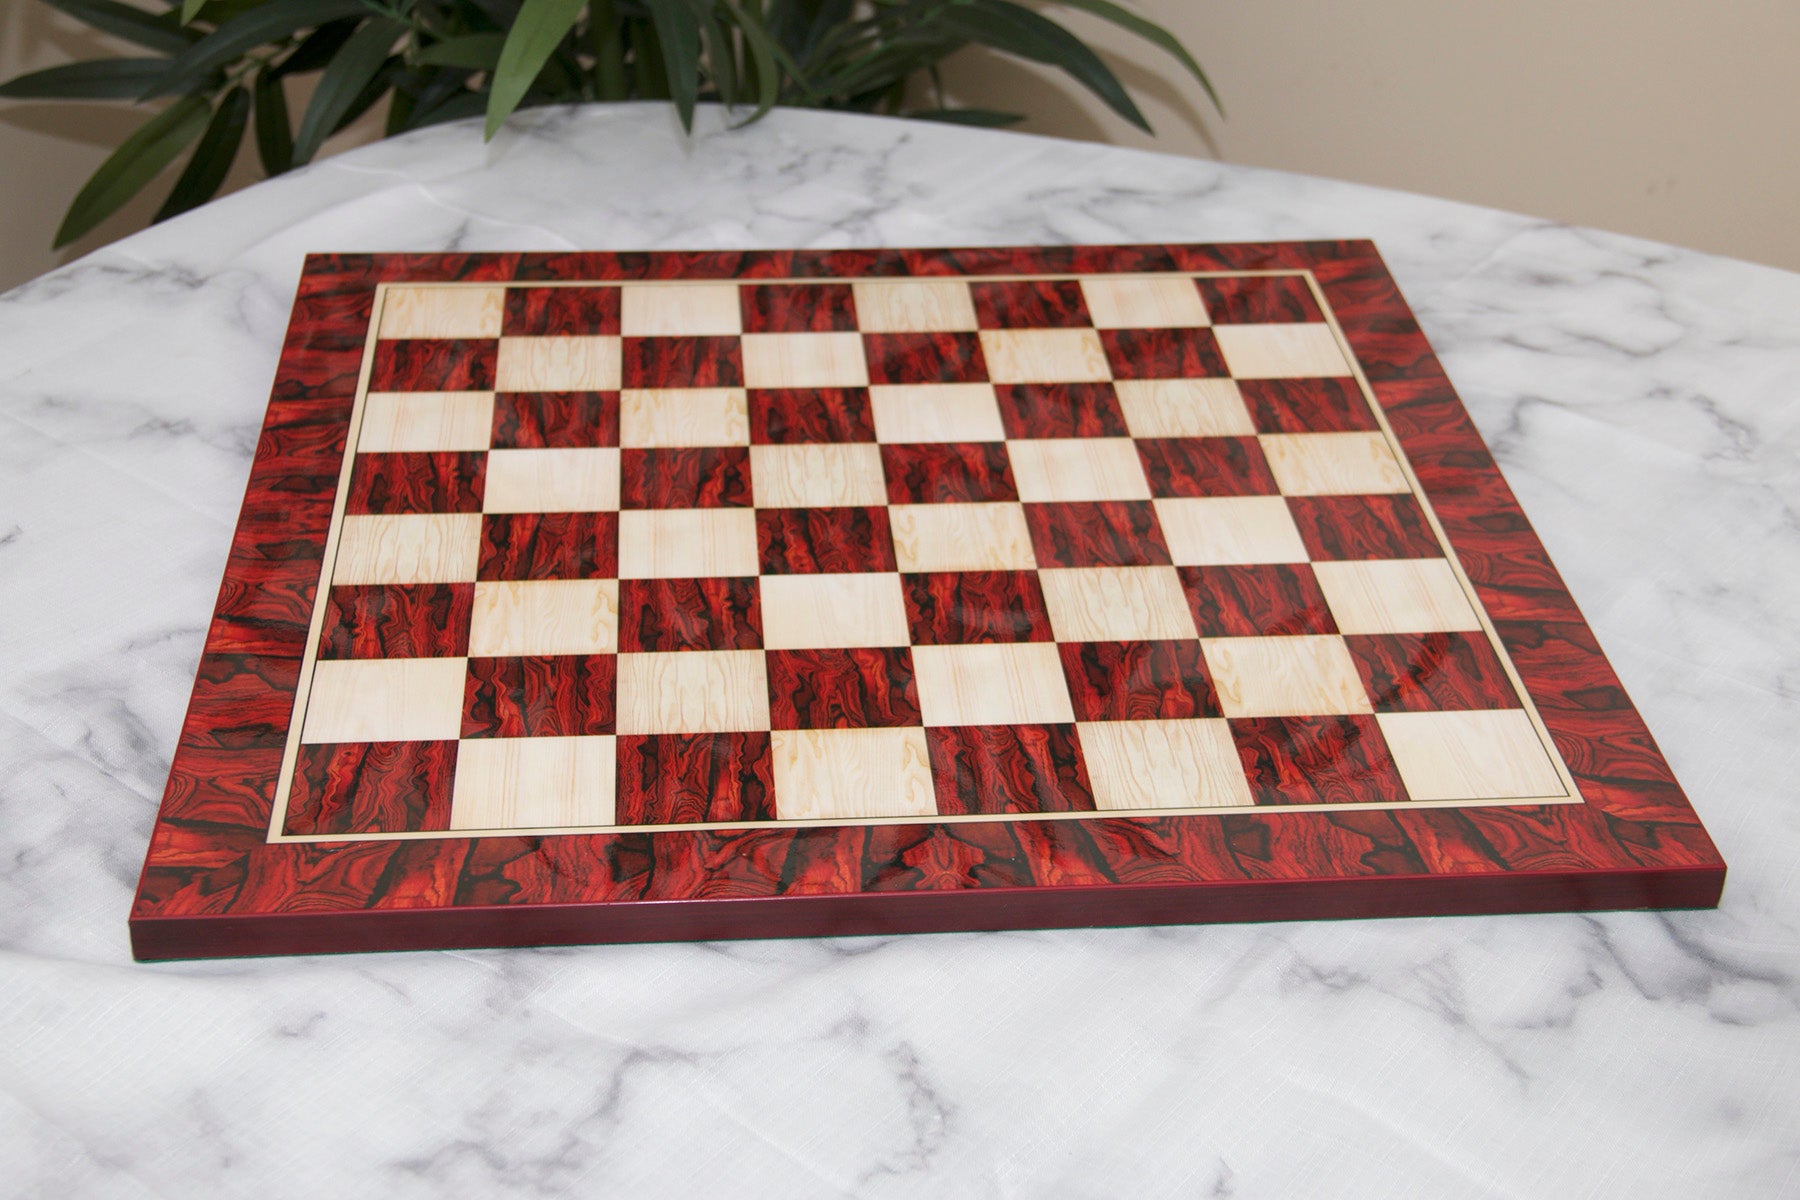 Luxury Chess Board 2.5" Square made in Burl Rosewood and Burl Maple Wood Look